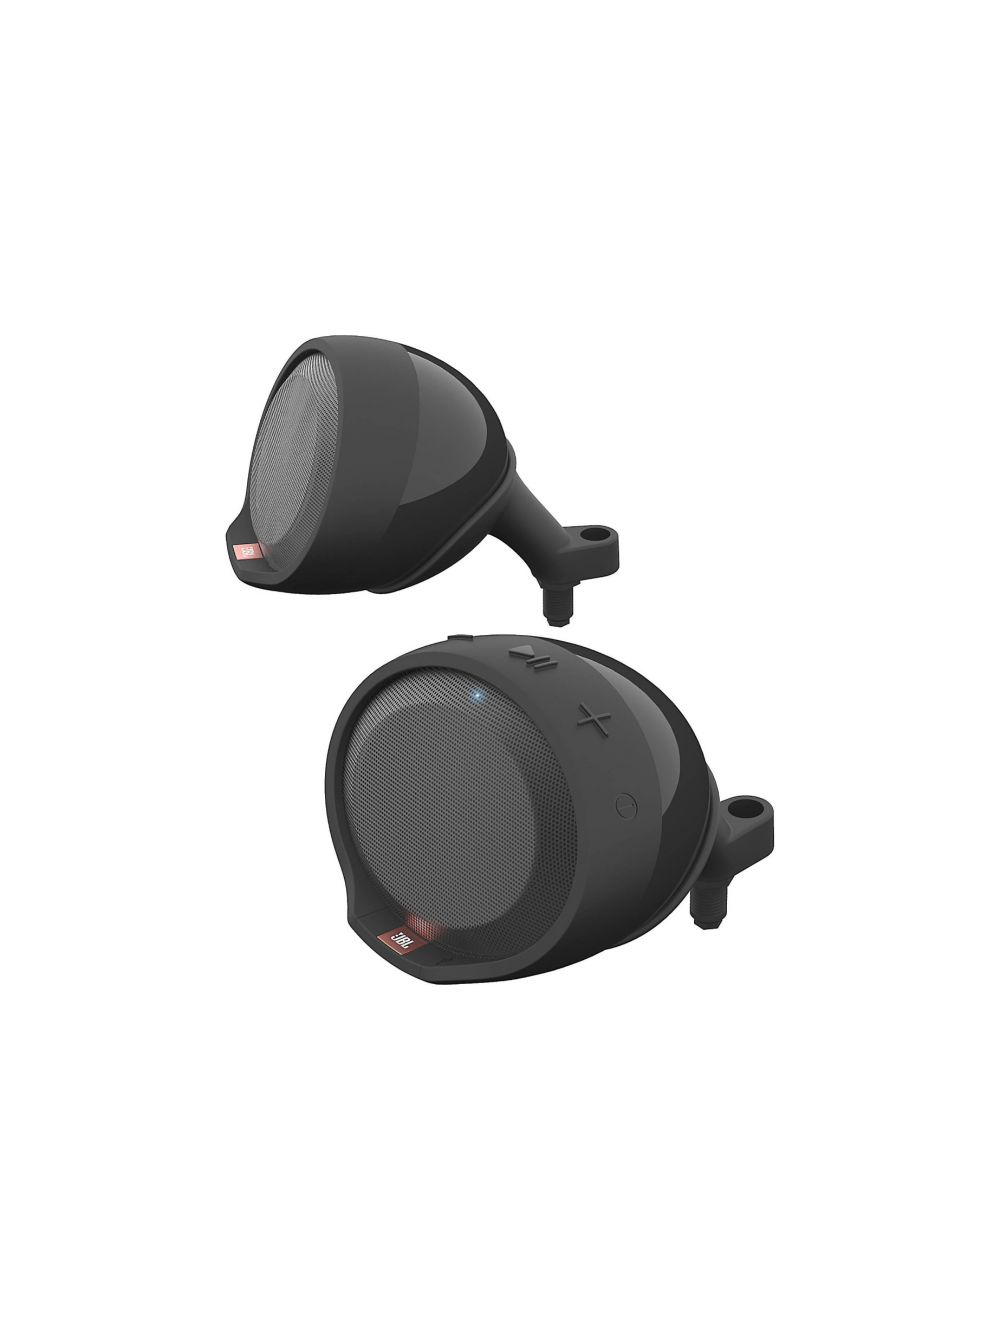 JBL Cruise Handlebar-mount Bluetooth speaker pods for motorcycles and scooters (Black)